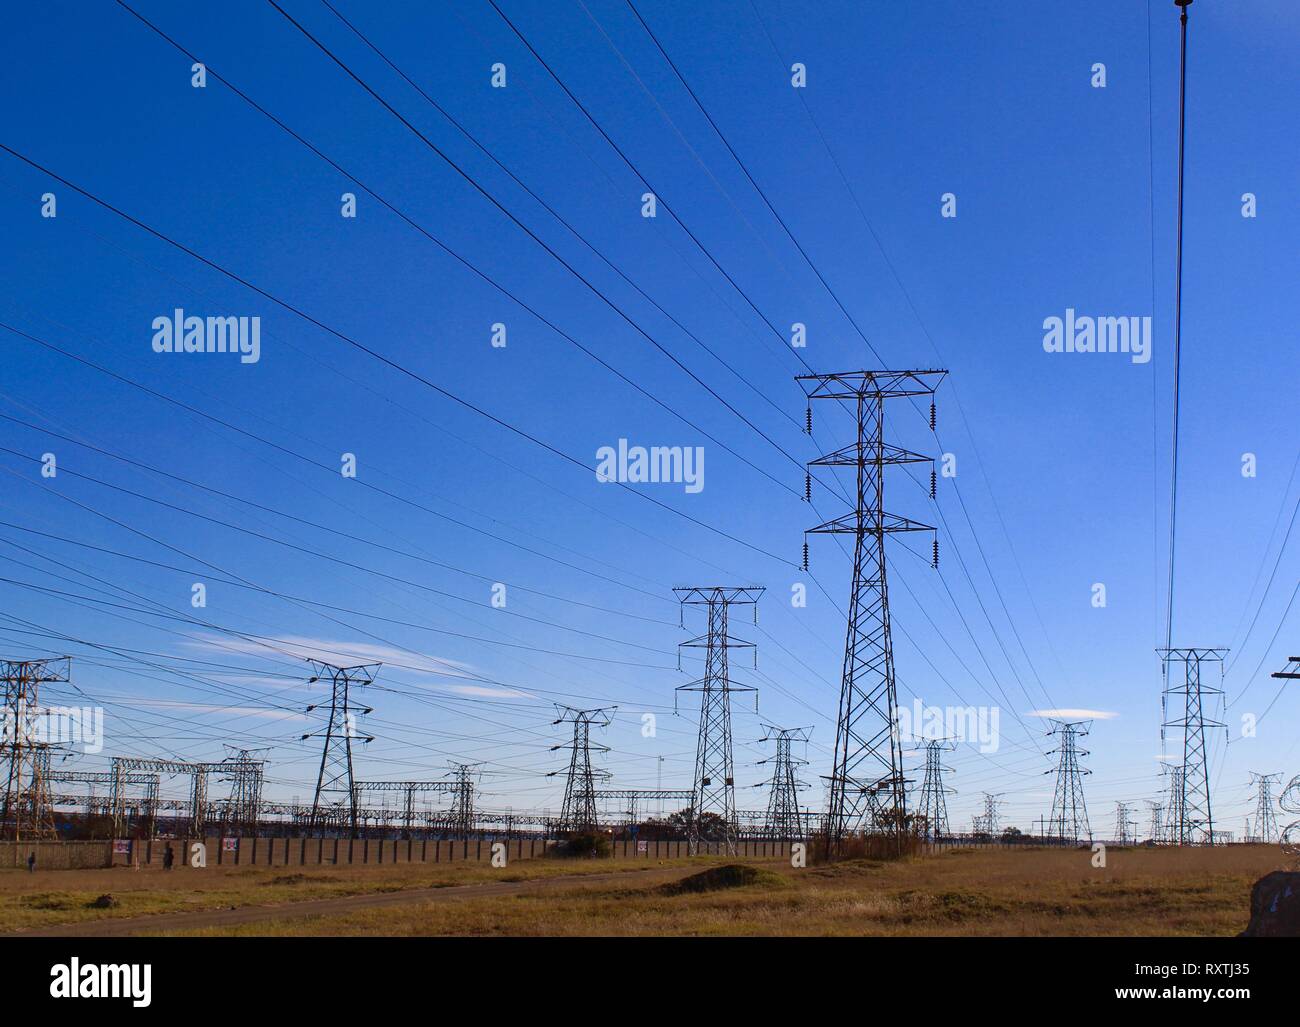 Electricity pylons in Soweto, Johannesburg, South Africa Stock Photo